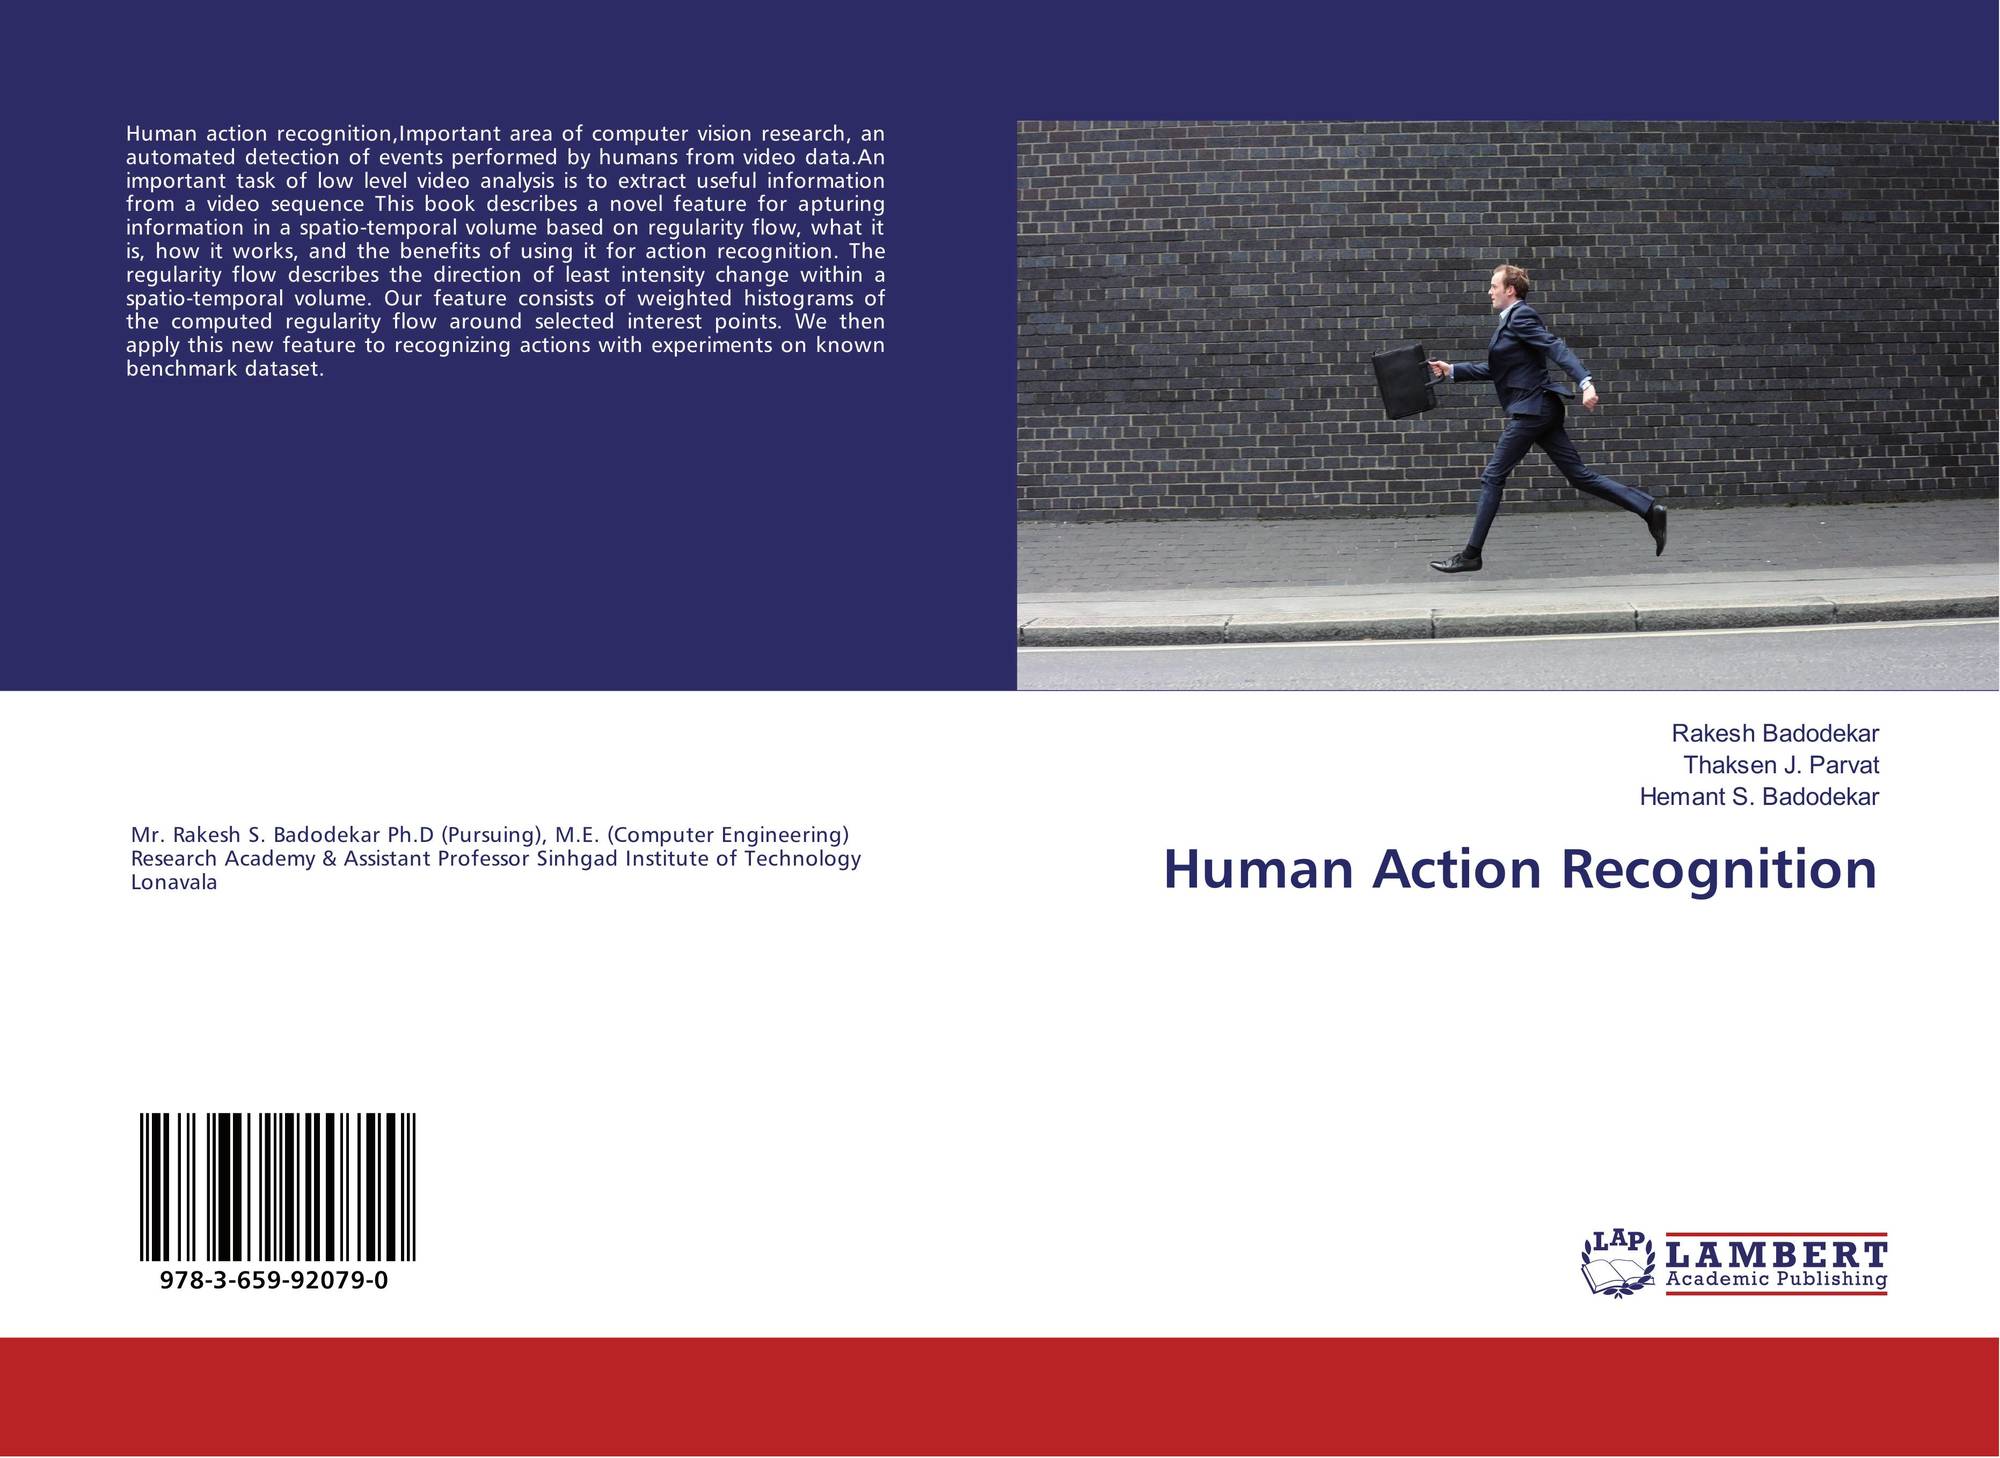 Human Actions book.